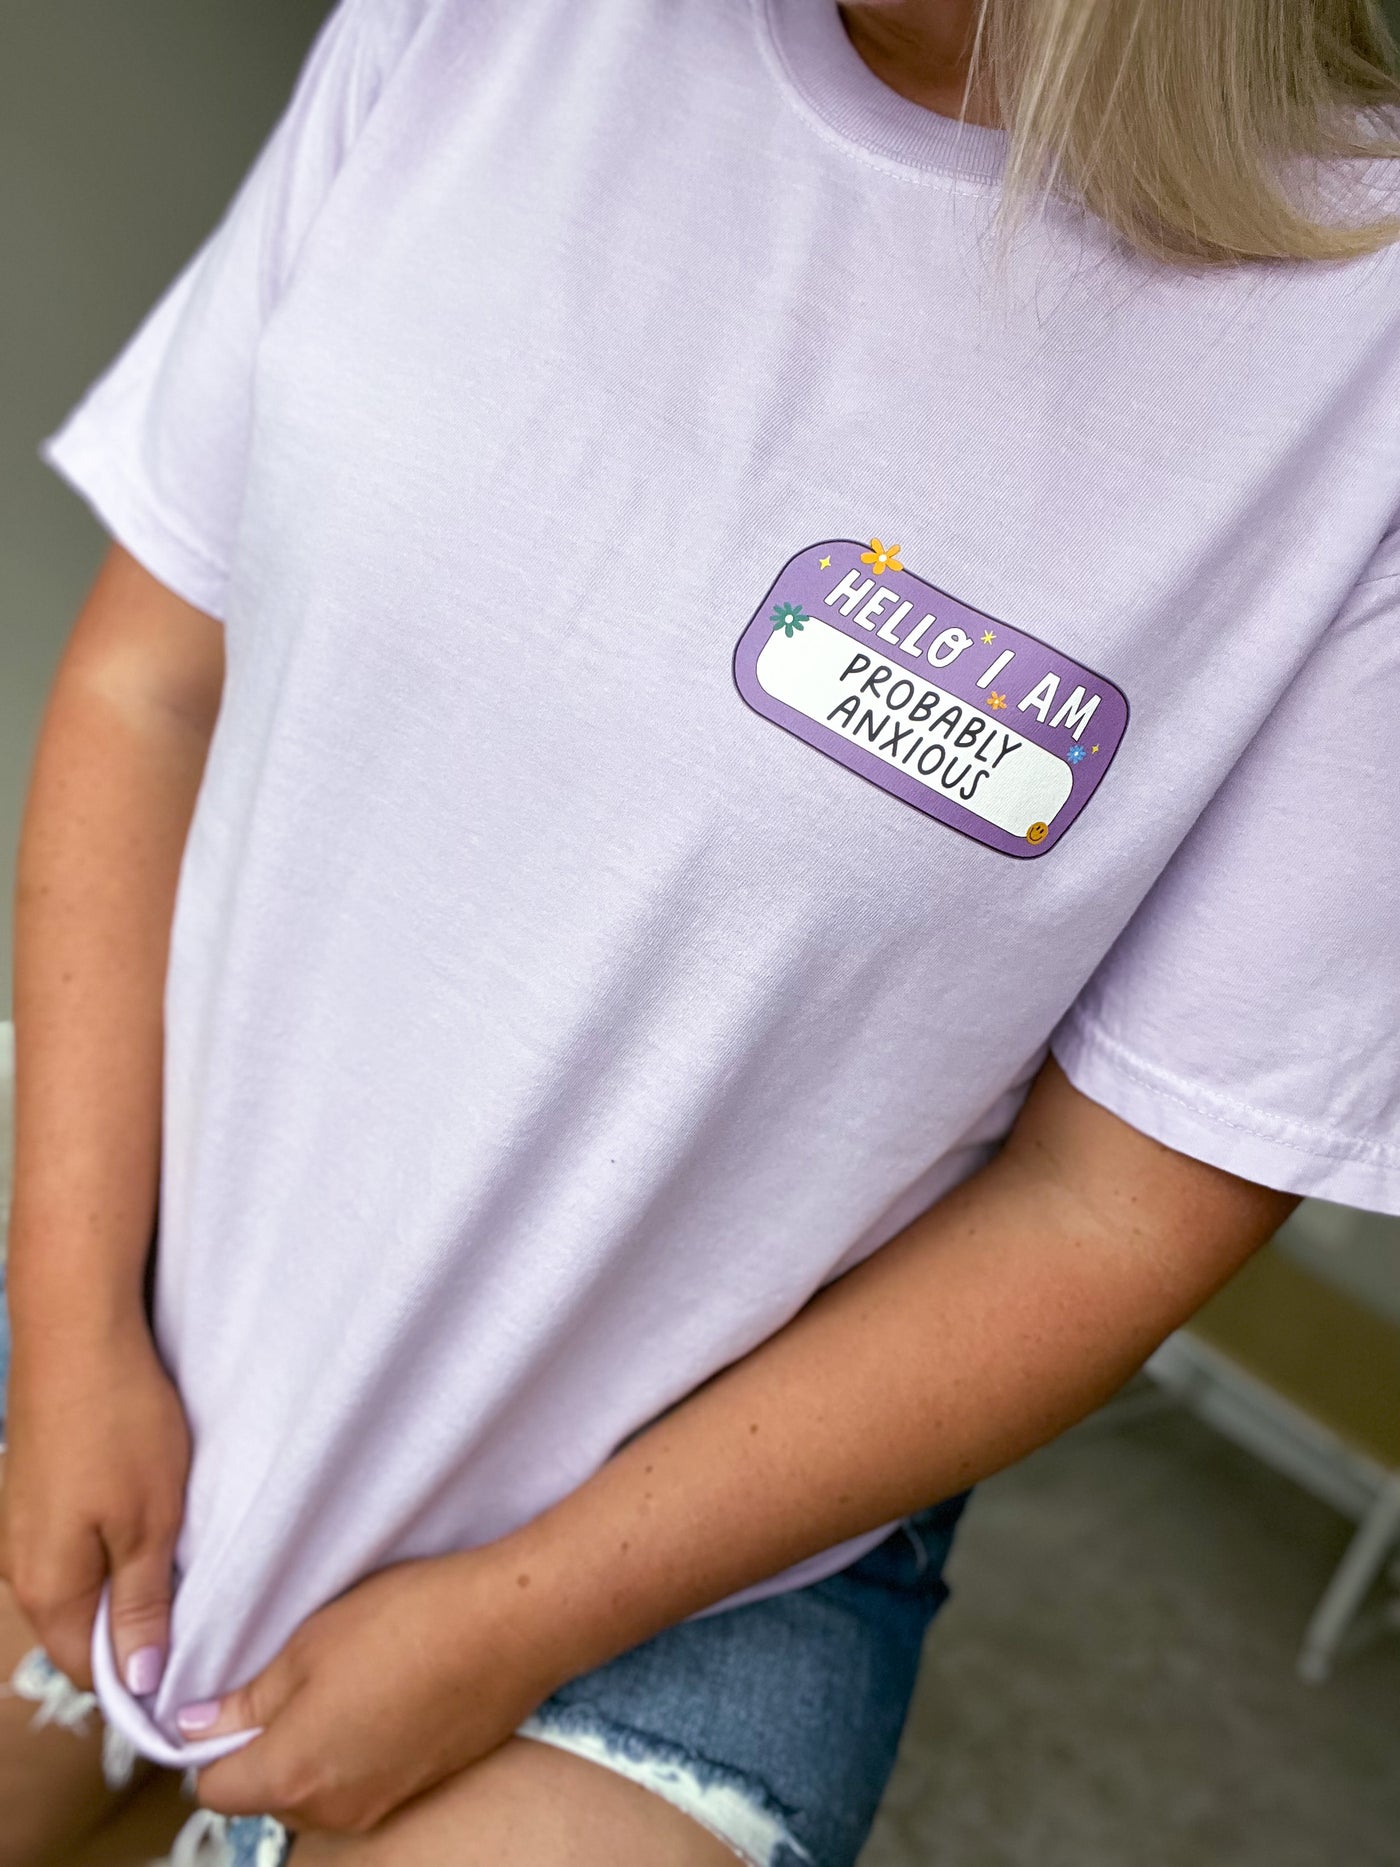 "Hello I Am: Probably Anxious" Name Tag T-shirt (shown on Comfort Colors "Orchid")